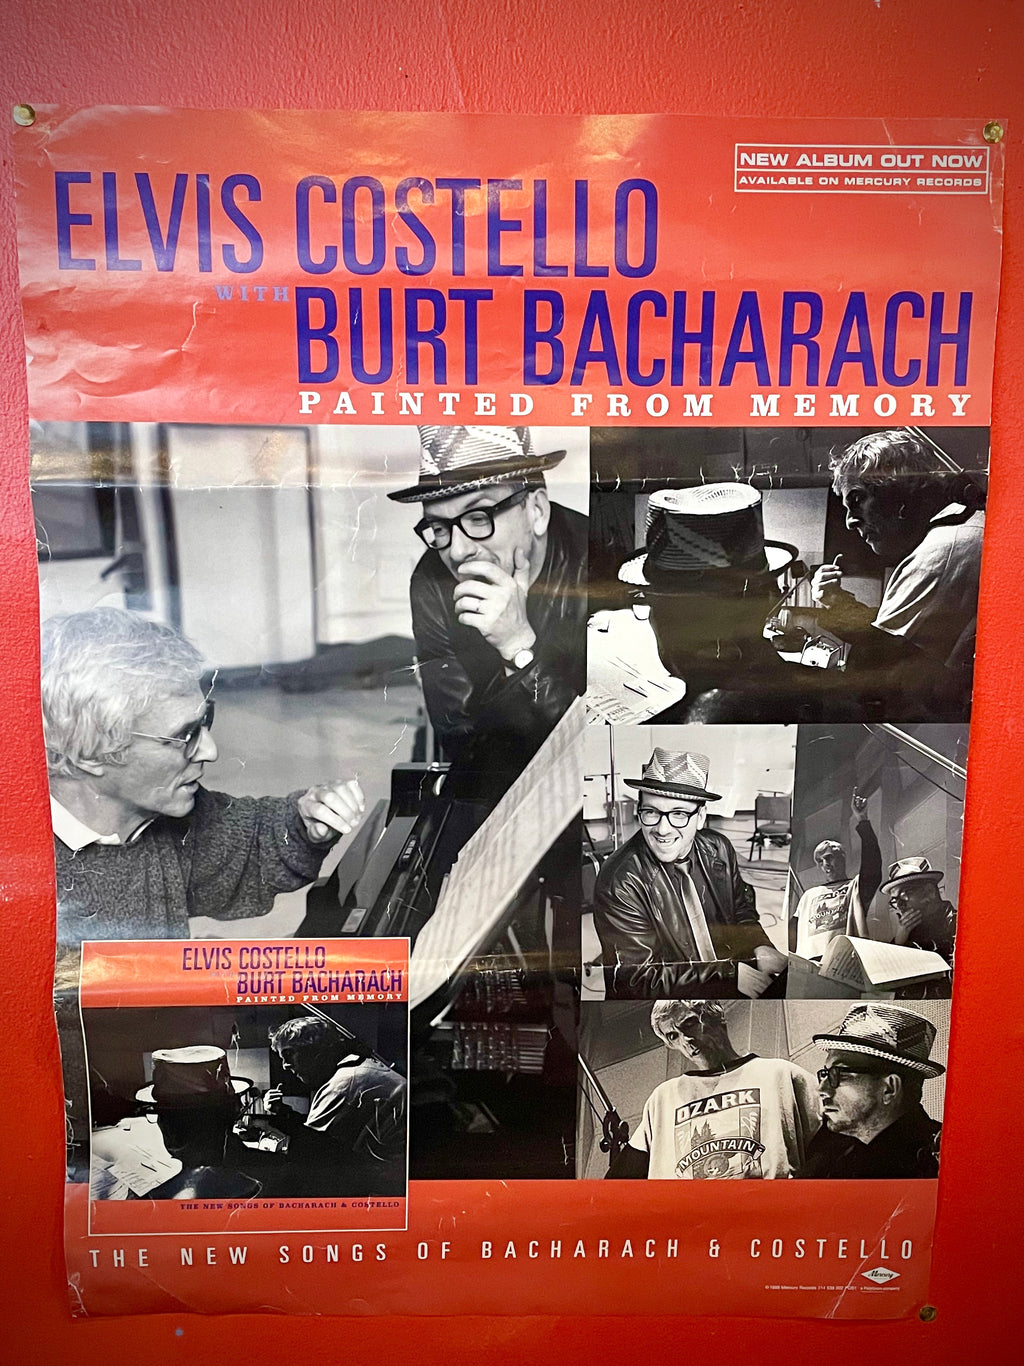 1998 Elvis Costello and Burt Bacharach "Painted From Memory" Poster